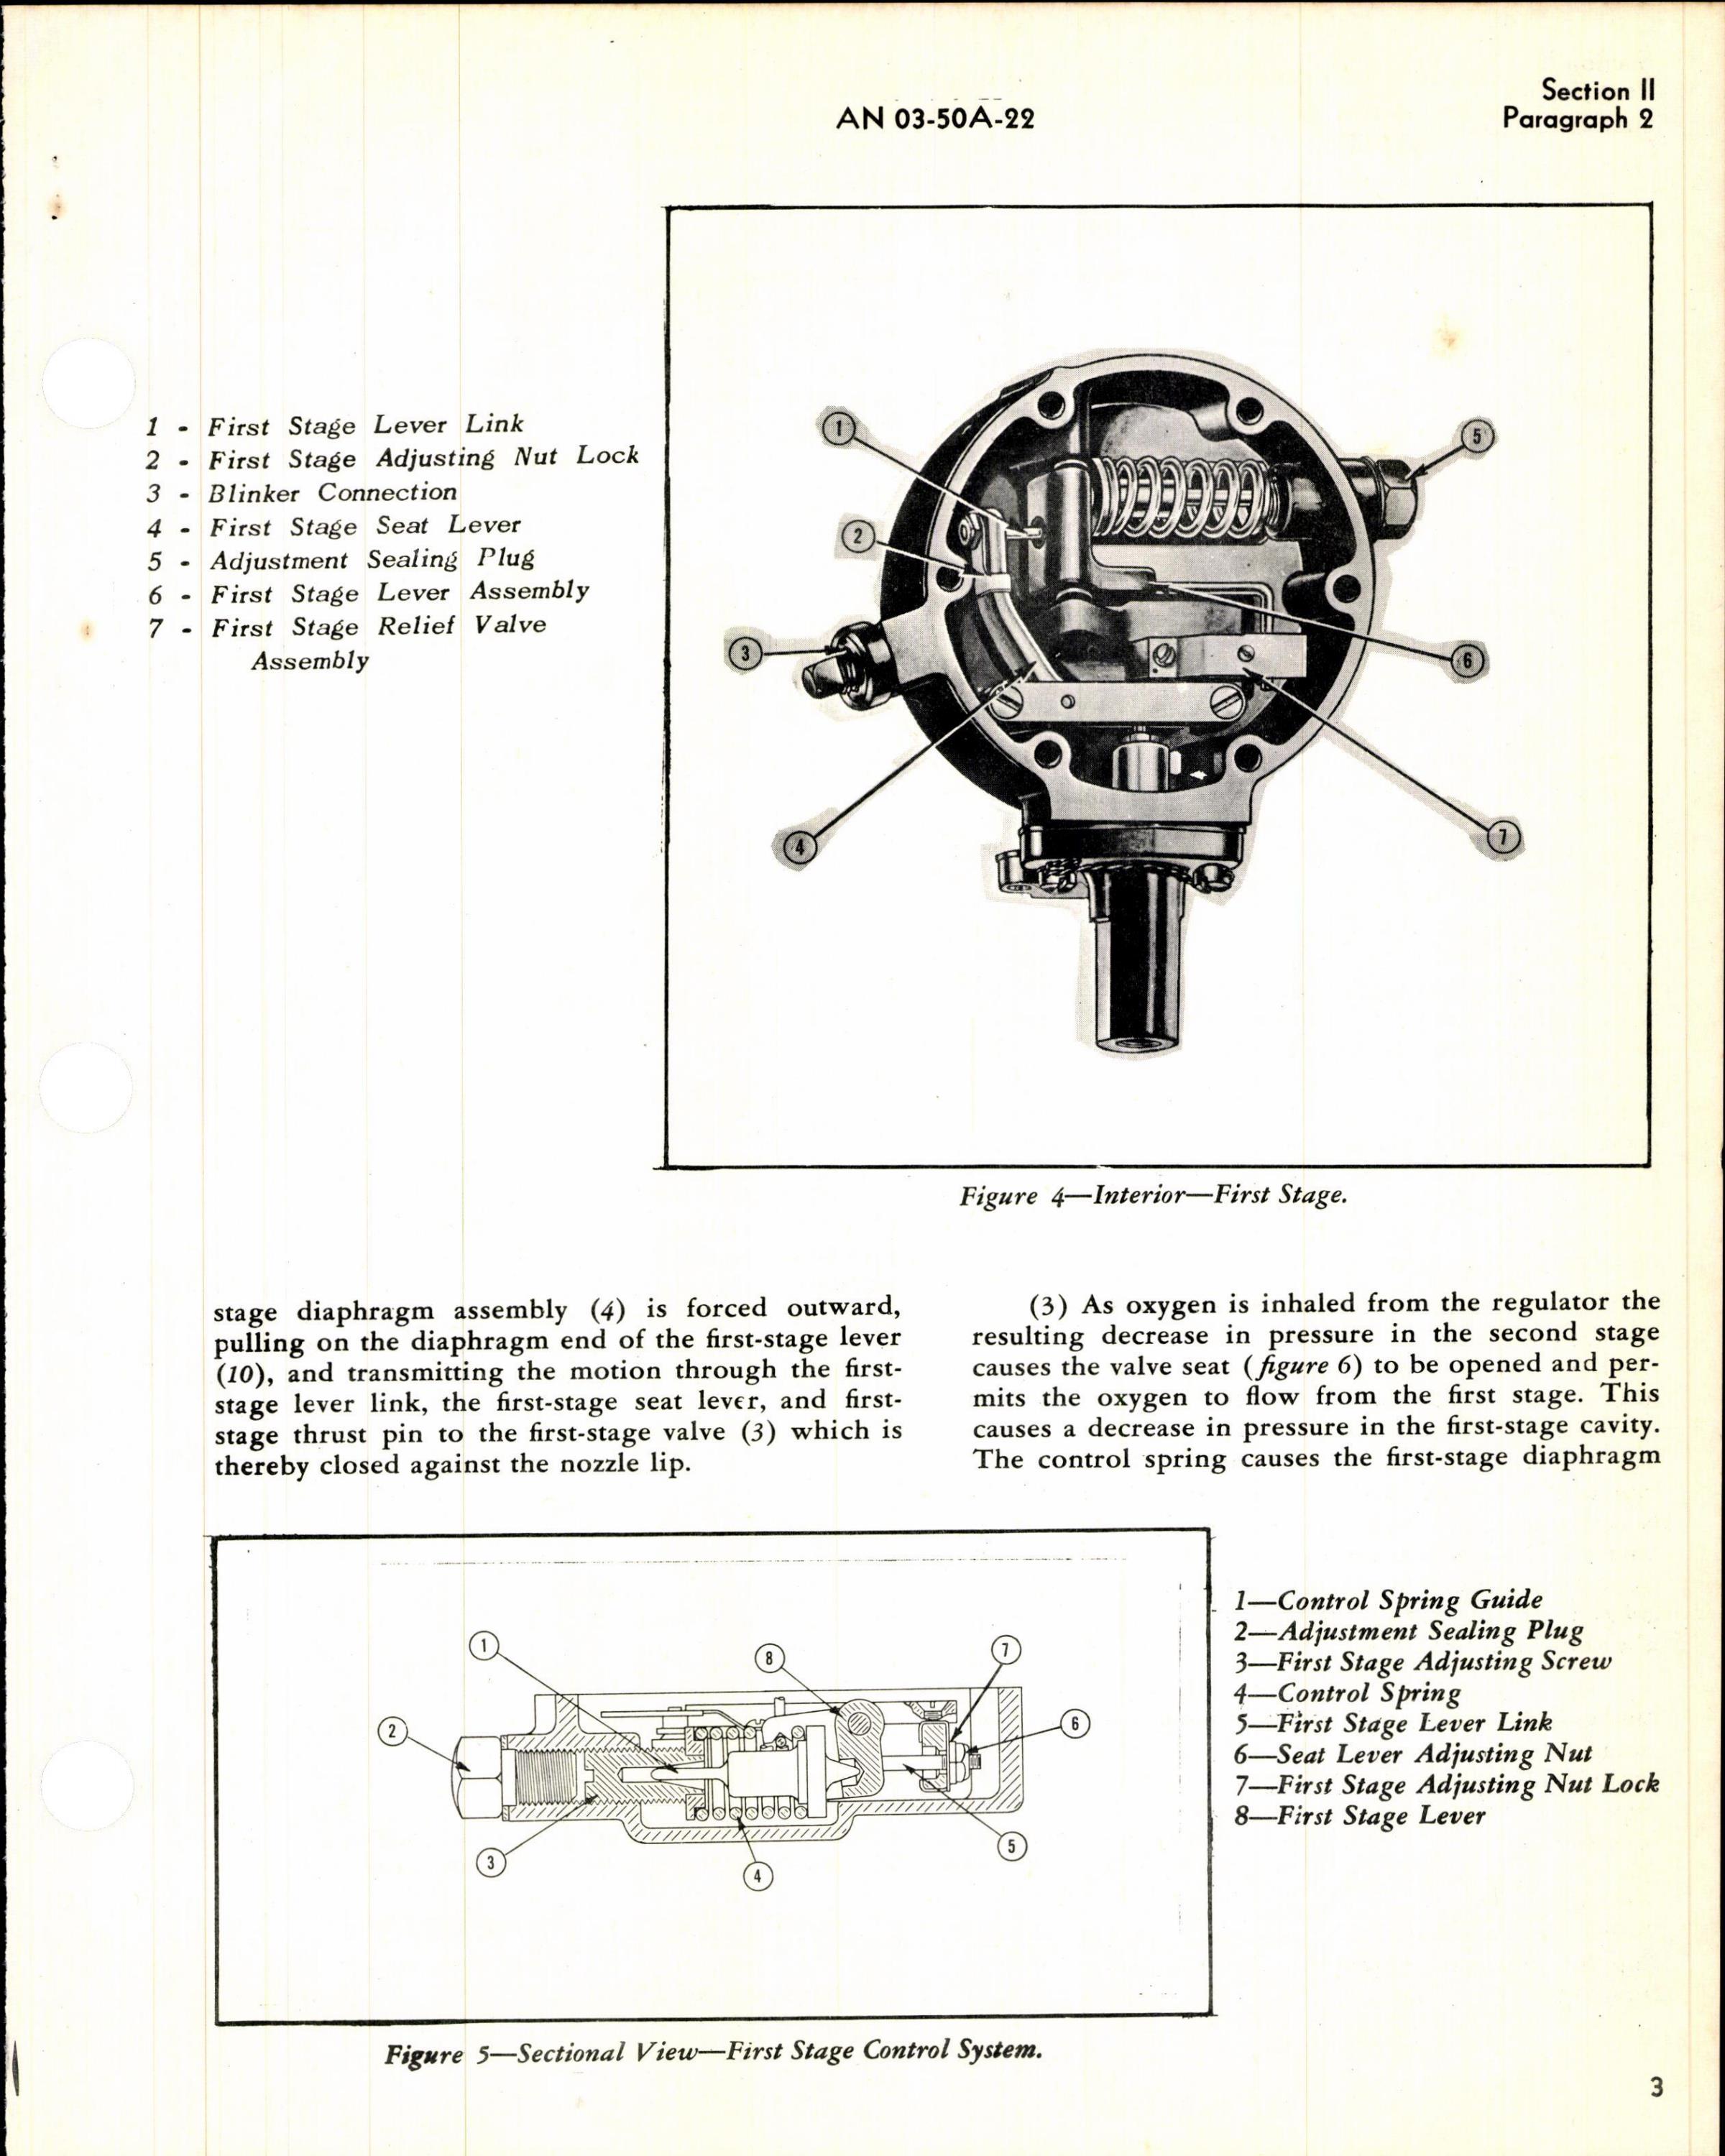 Sample page 3 from AirCorps Library document: Operation, Service, & Overhaul Instructions with Parts Catalog for Type A-14 Pressure Breathing Diluter Demand Oxygen Regulator